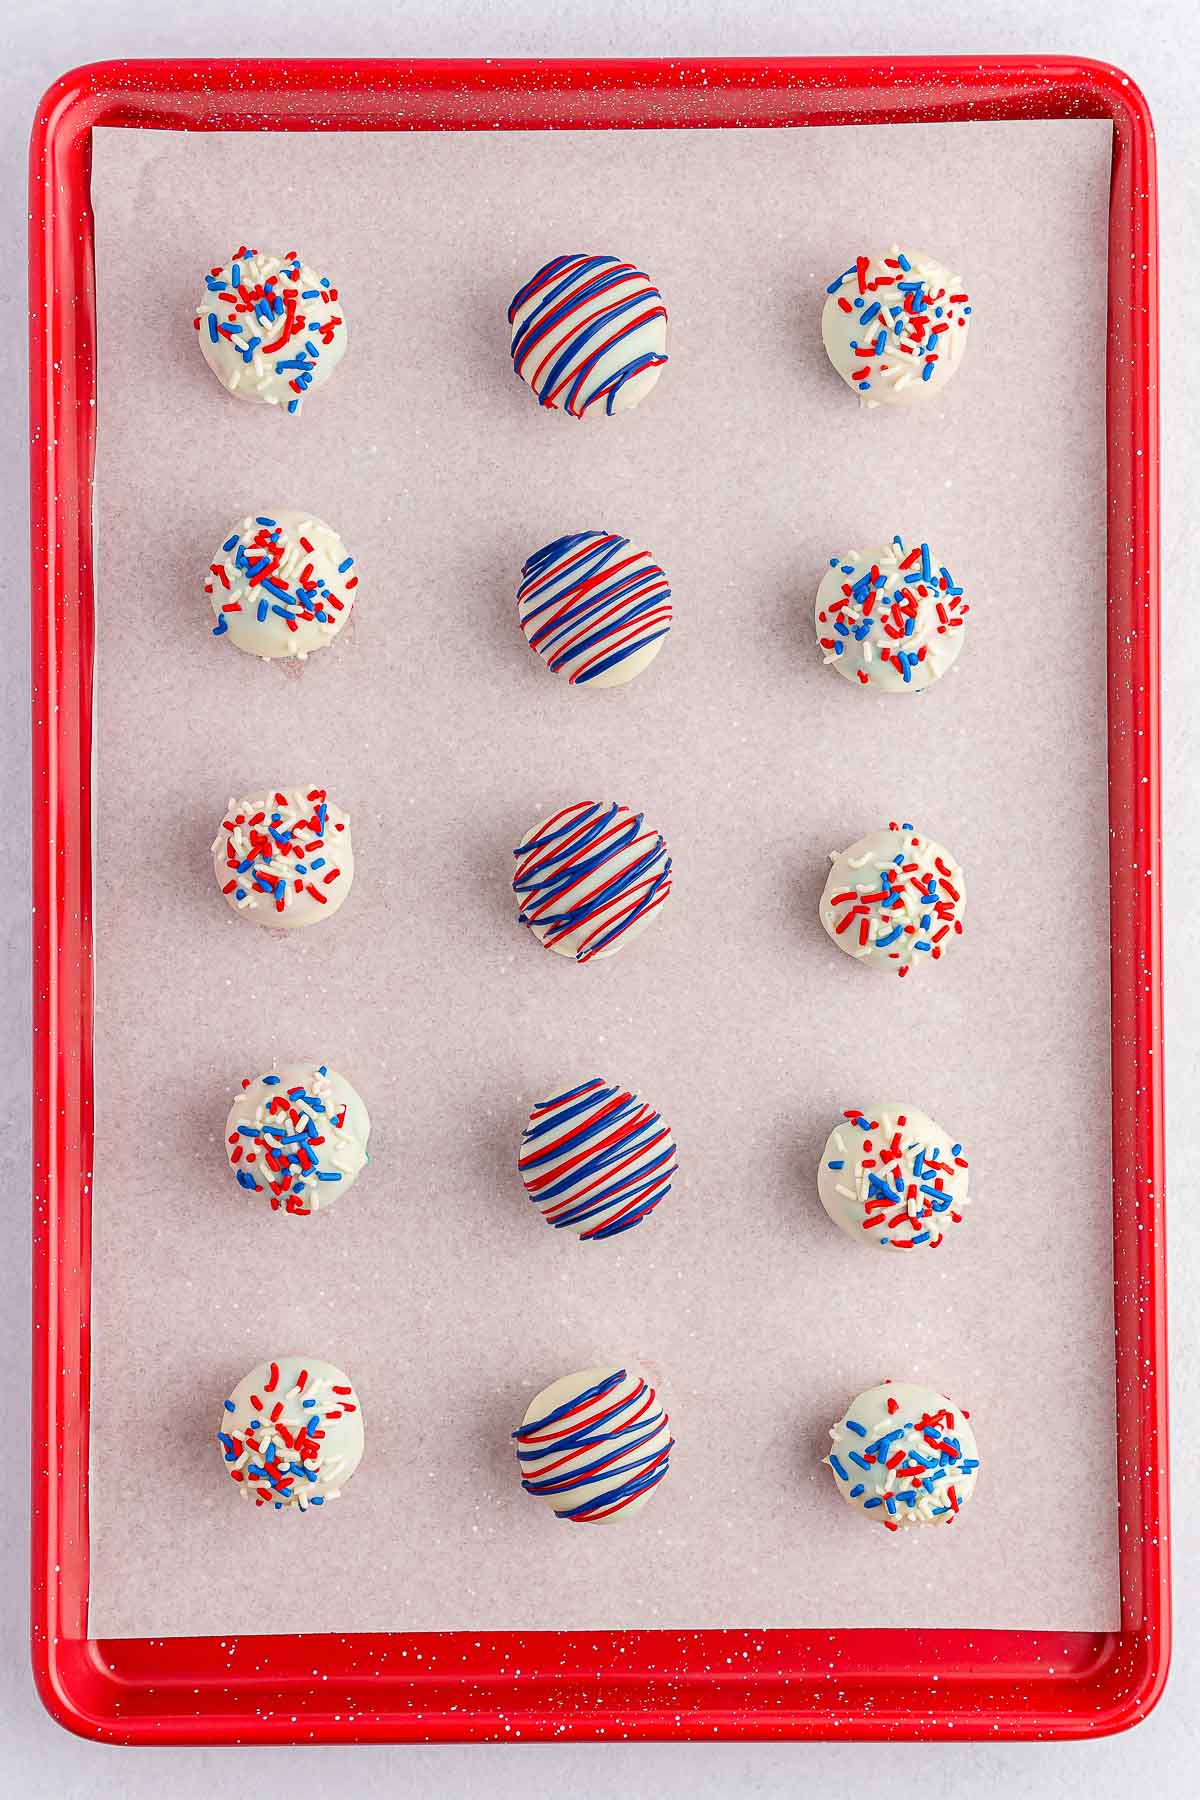 baking sheet with white coated cake balls. come with red white and blue sprinkles and some with red and blue drizzled icing.